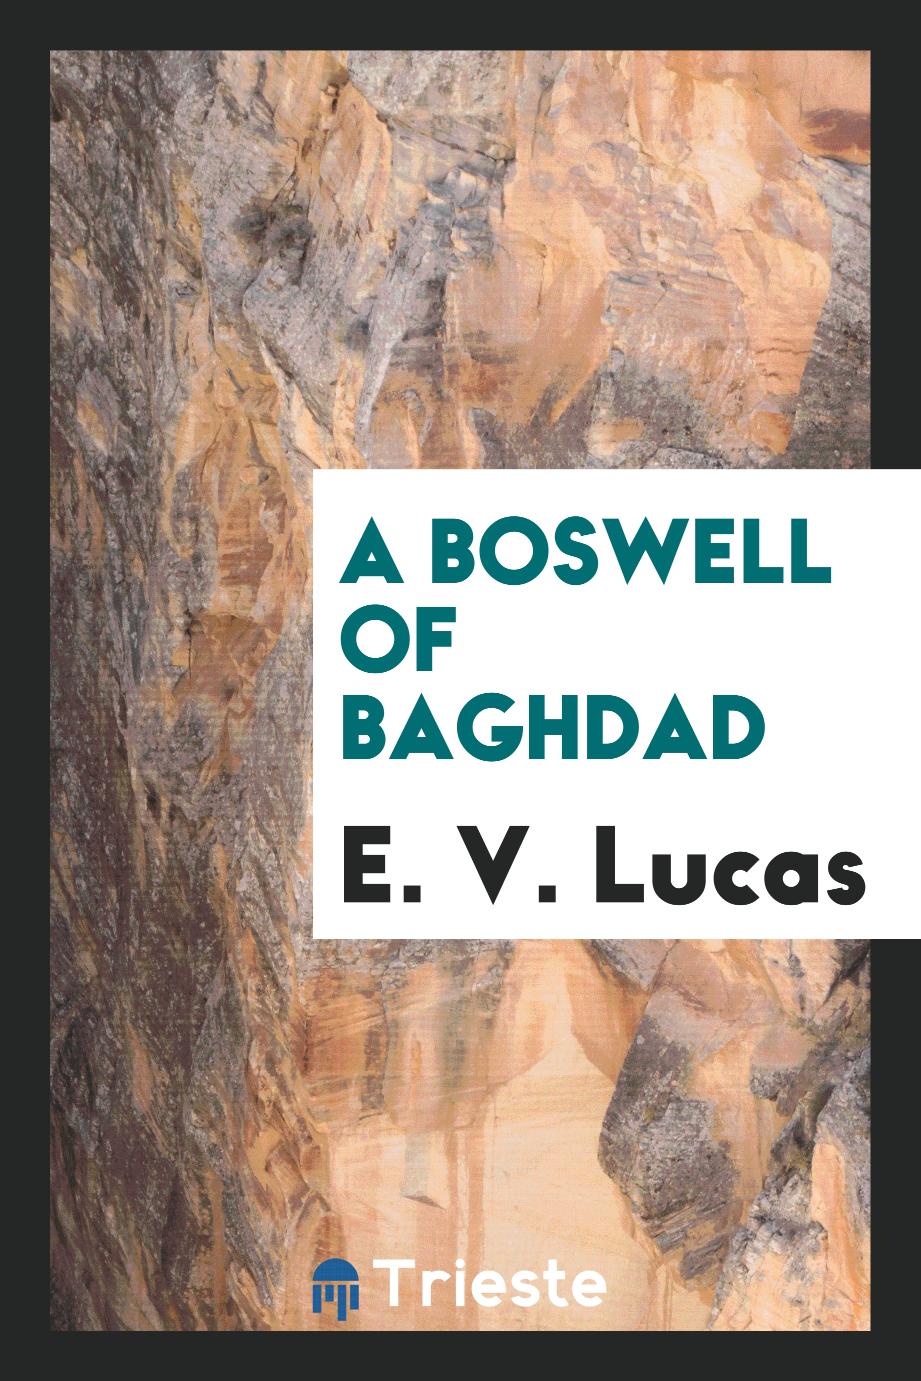 A Boswell of Baghdad